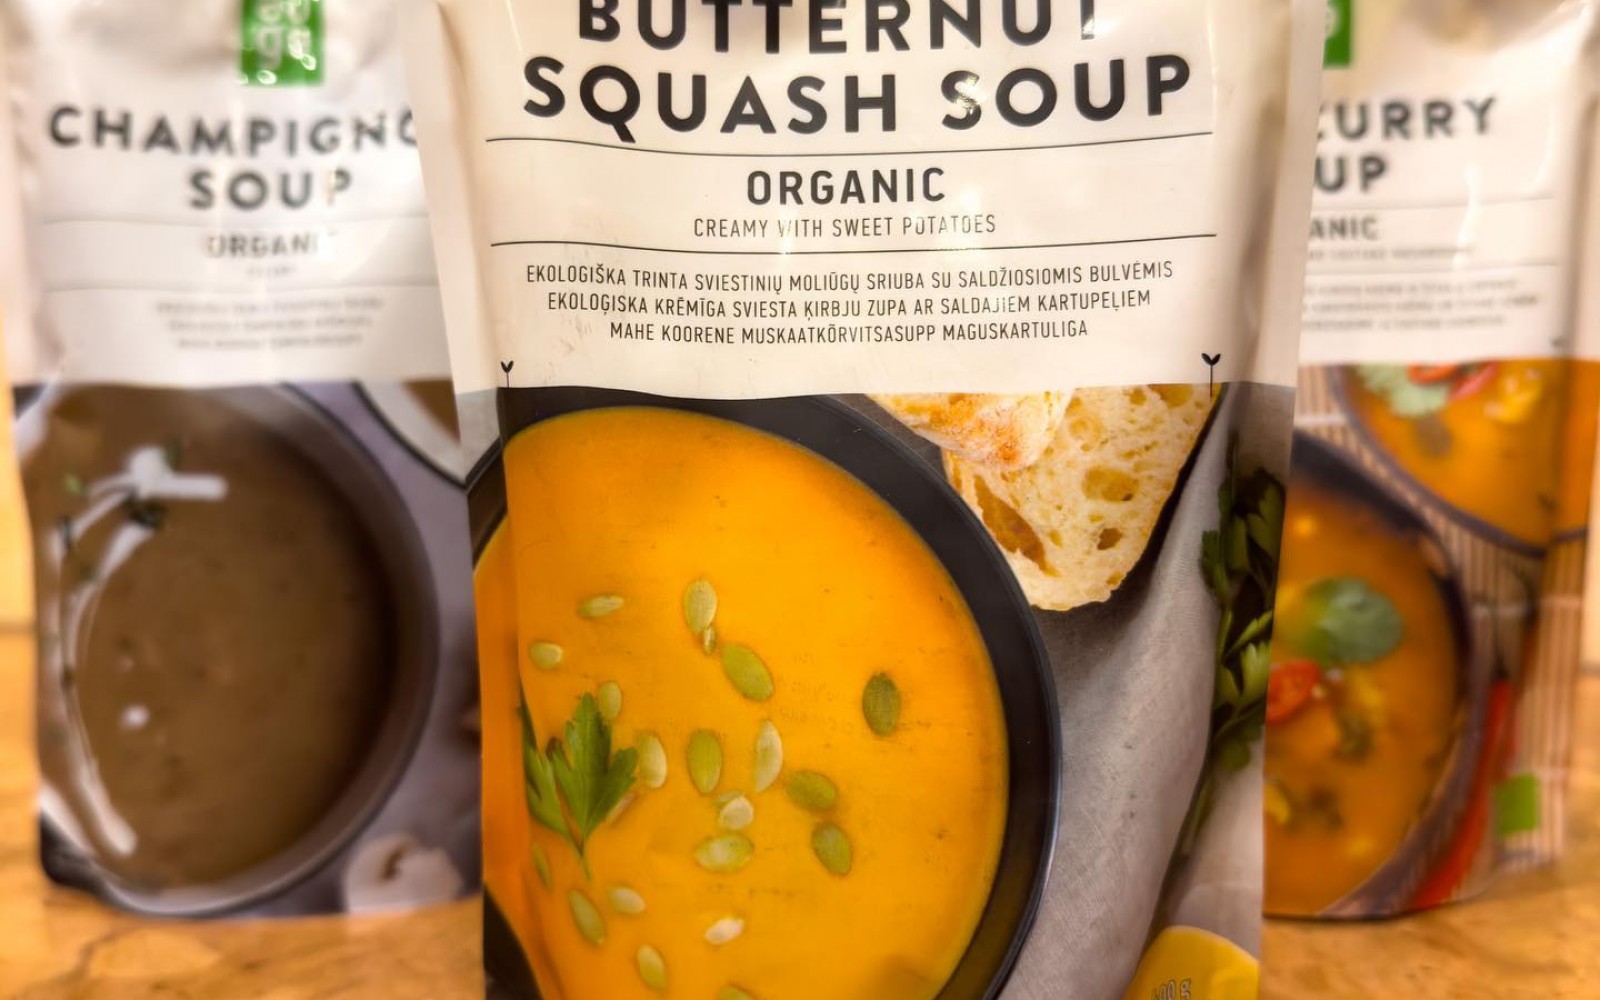 This soup is special because it is made from only the highest quality, organic ingredients